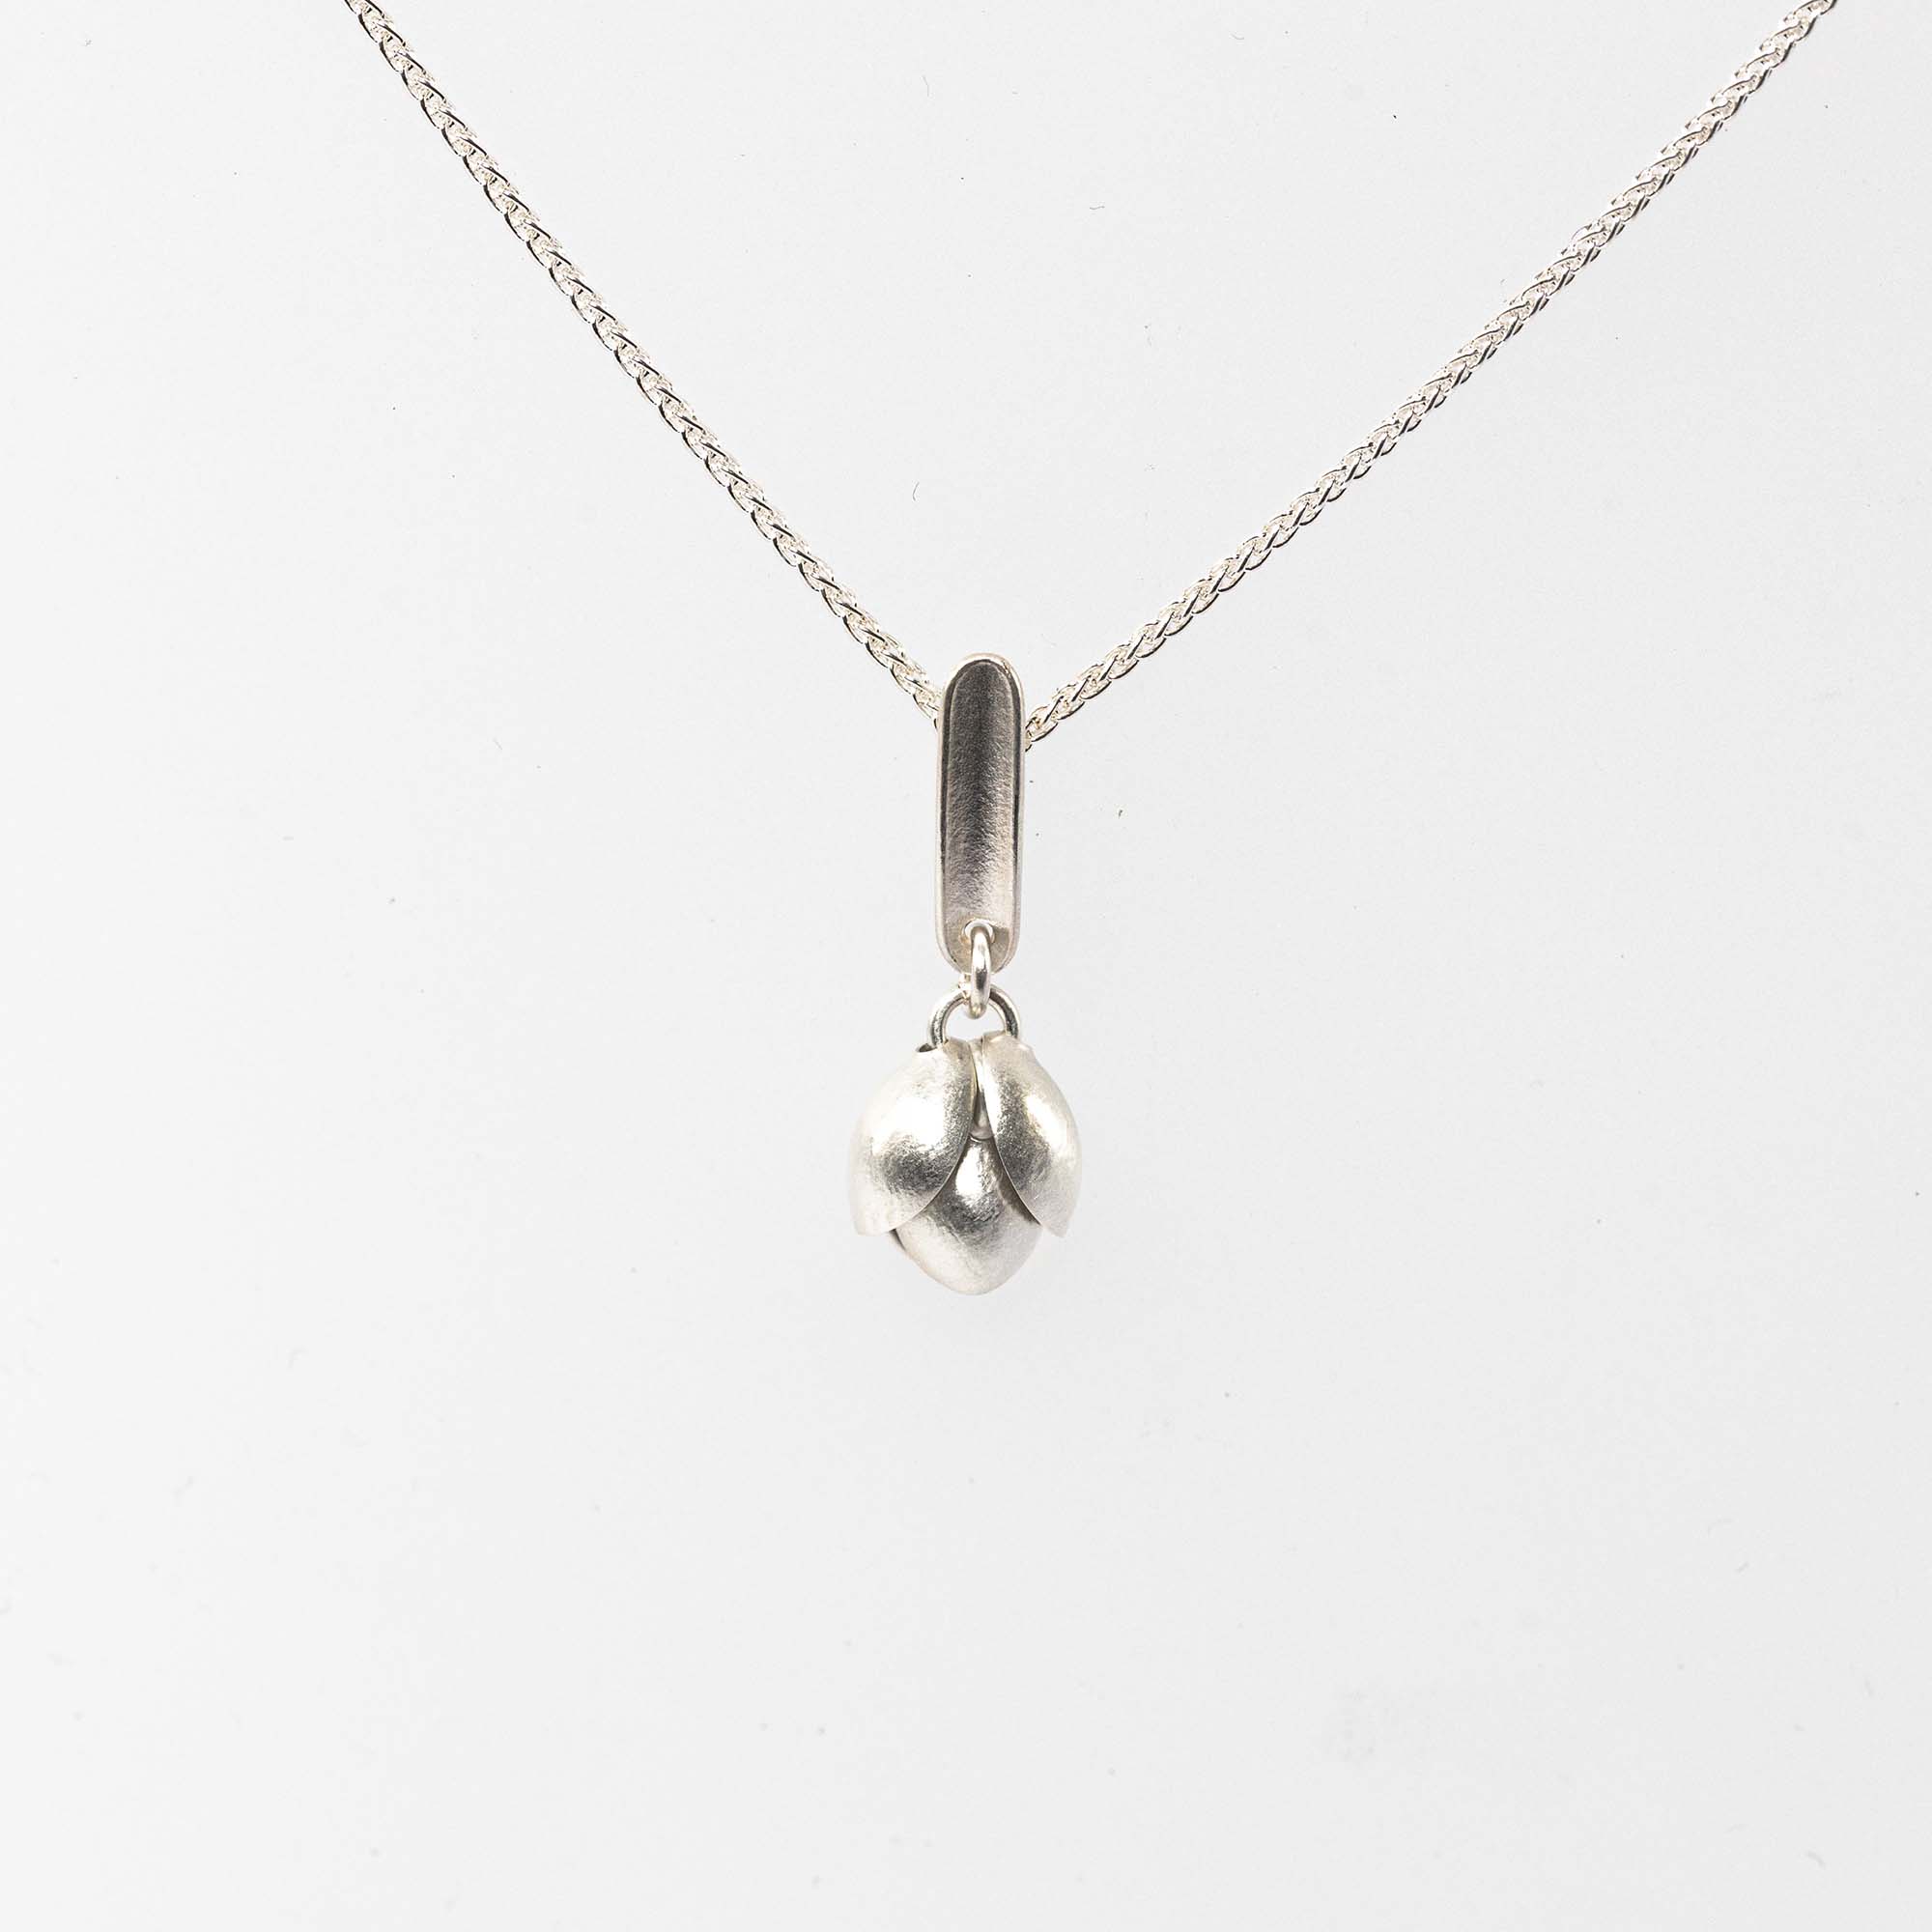 Glenn Campbell QGS2-S Small Silver GrassPod pendant with 2 layers £64